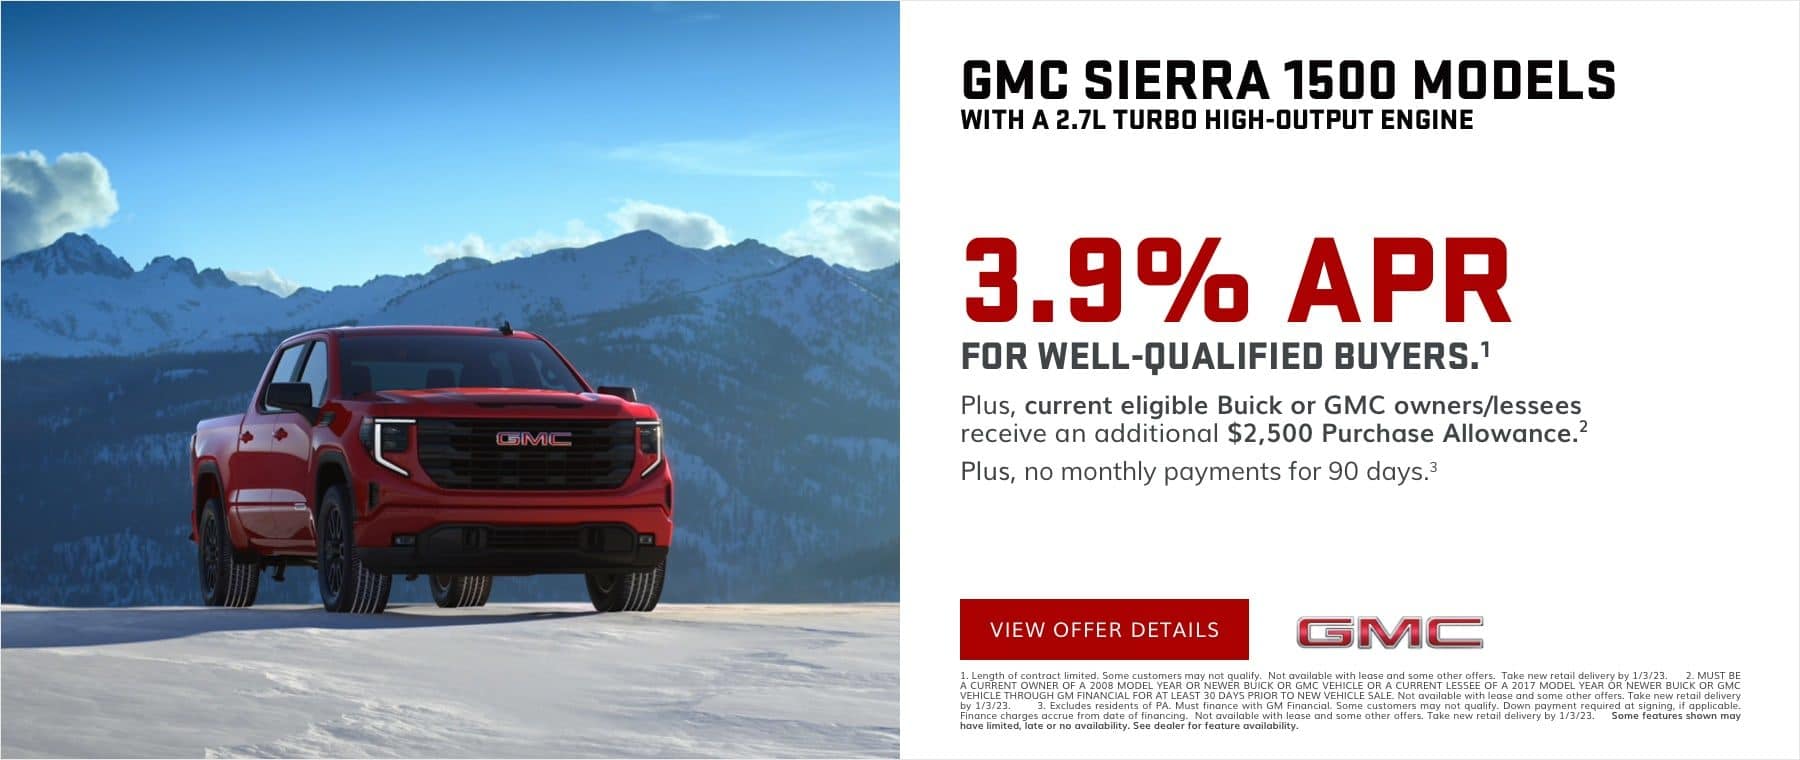 3.9% APR for 72 months for well-qualified buyers.1 Plus, current eligible Buick or GMC owners/lessees receive an additional $2,500 Purchase Allowance.2 PLUS, NO MONTHLY PAYMENTS UNTIL 2023. 3